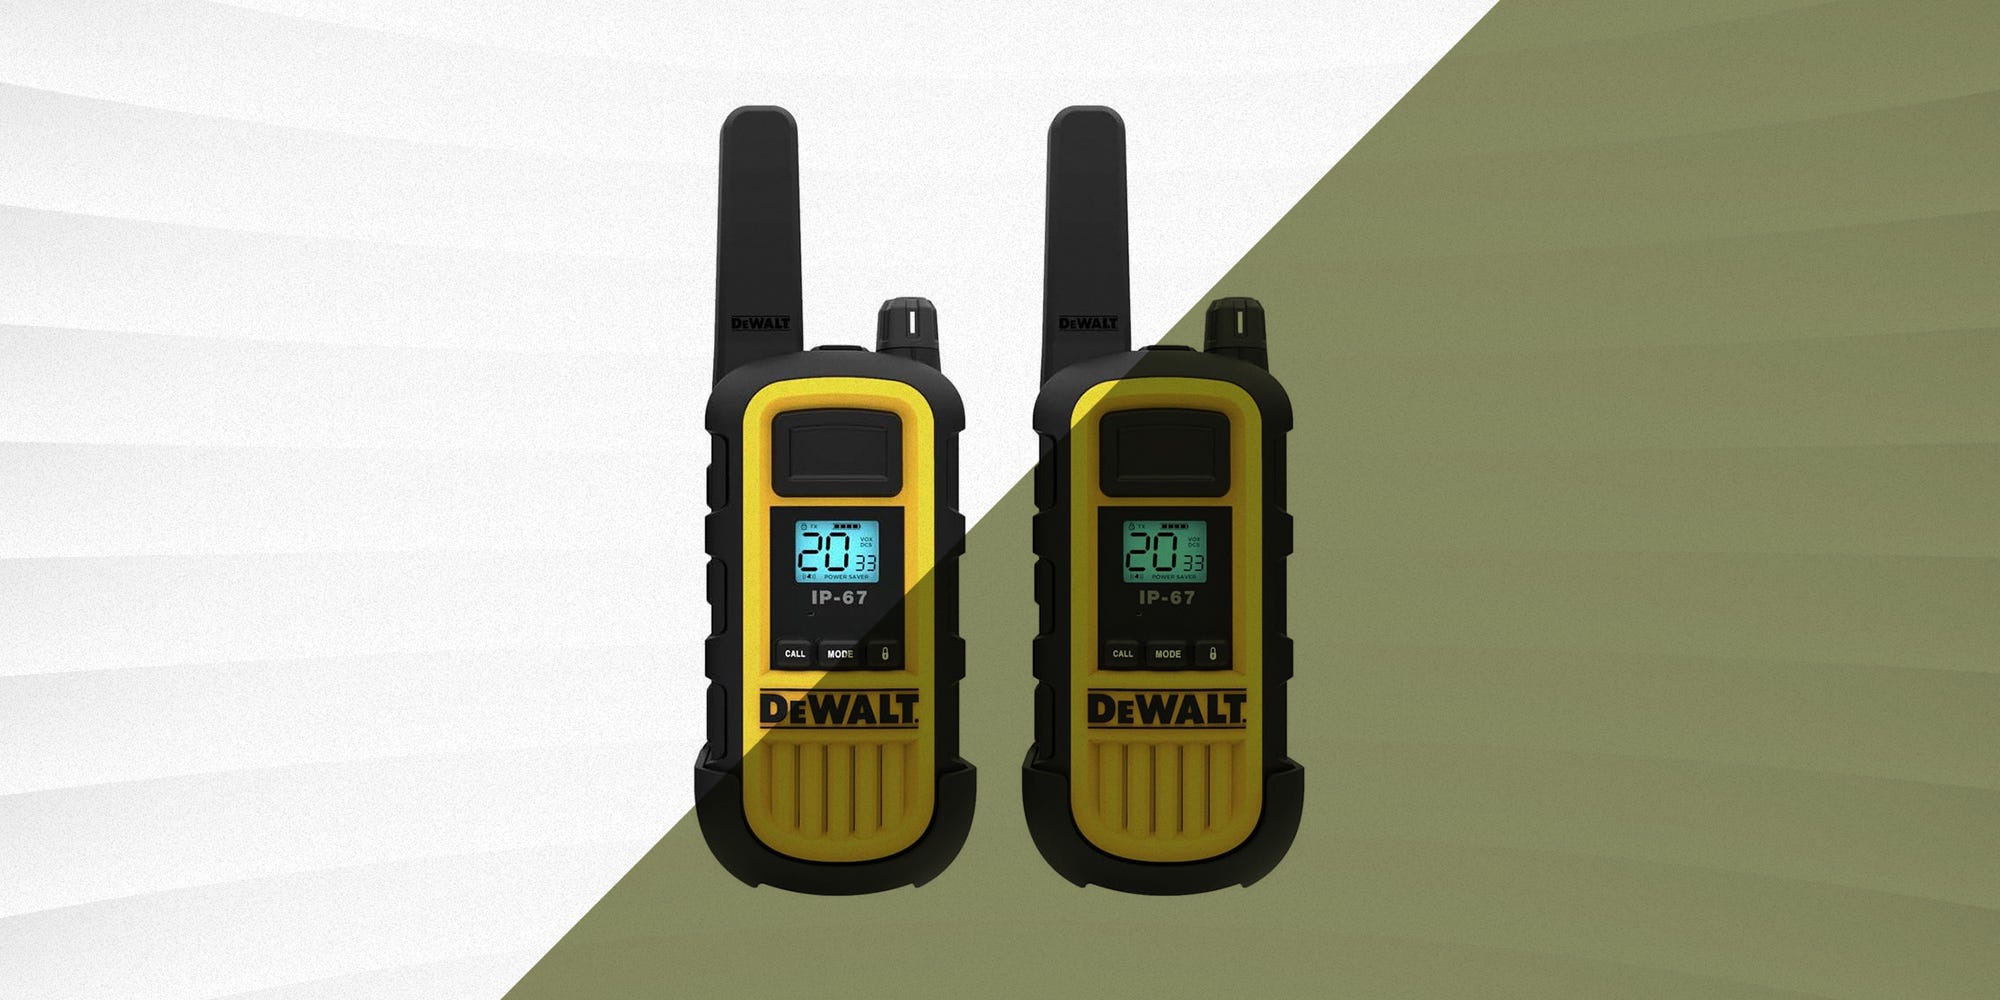 Our Favorite Walkie Talkies From the Trails to the Worksite